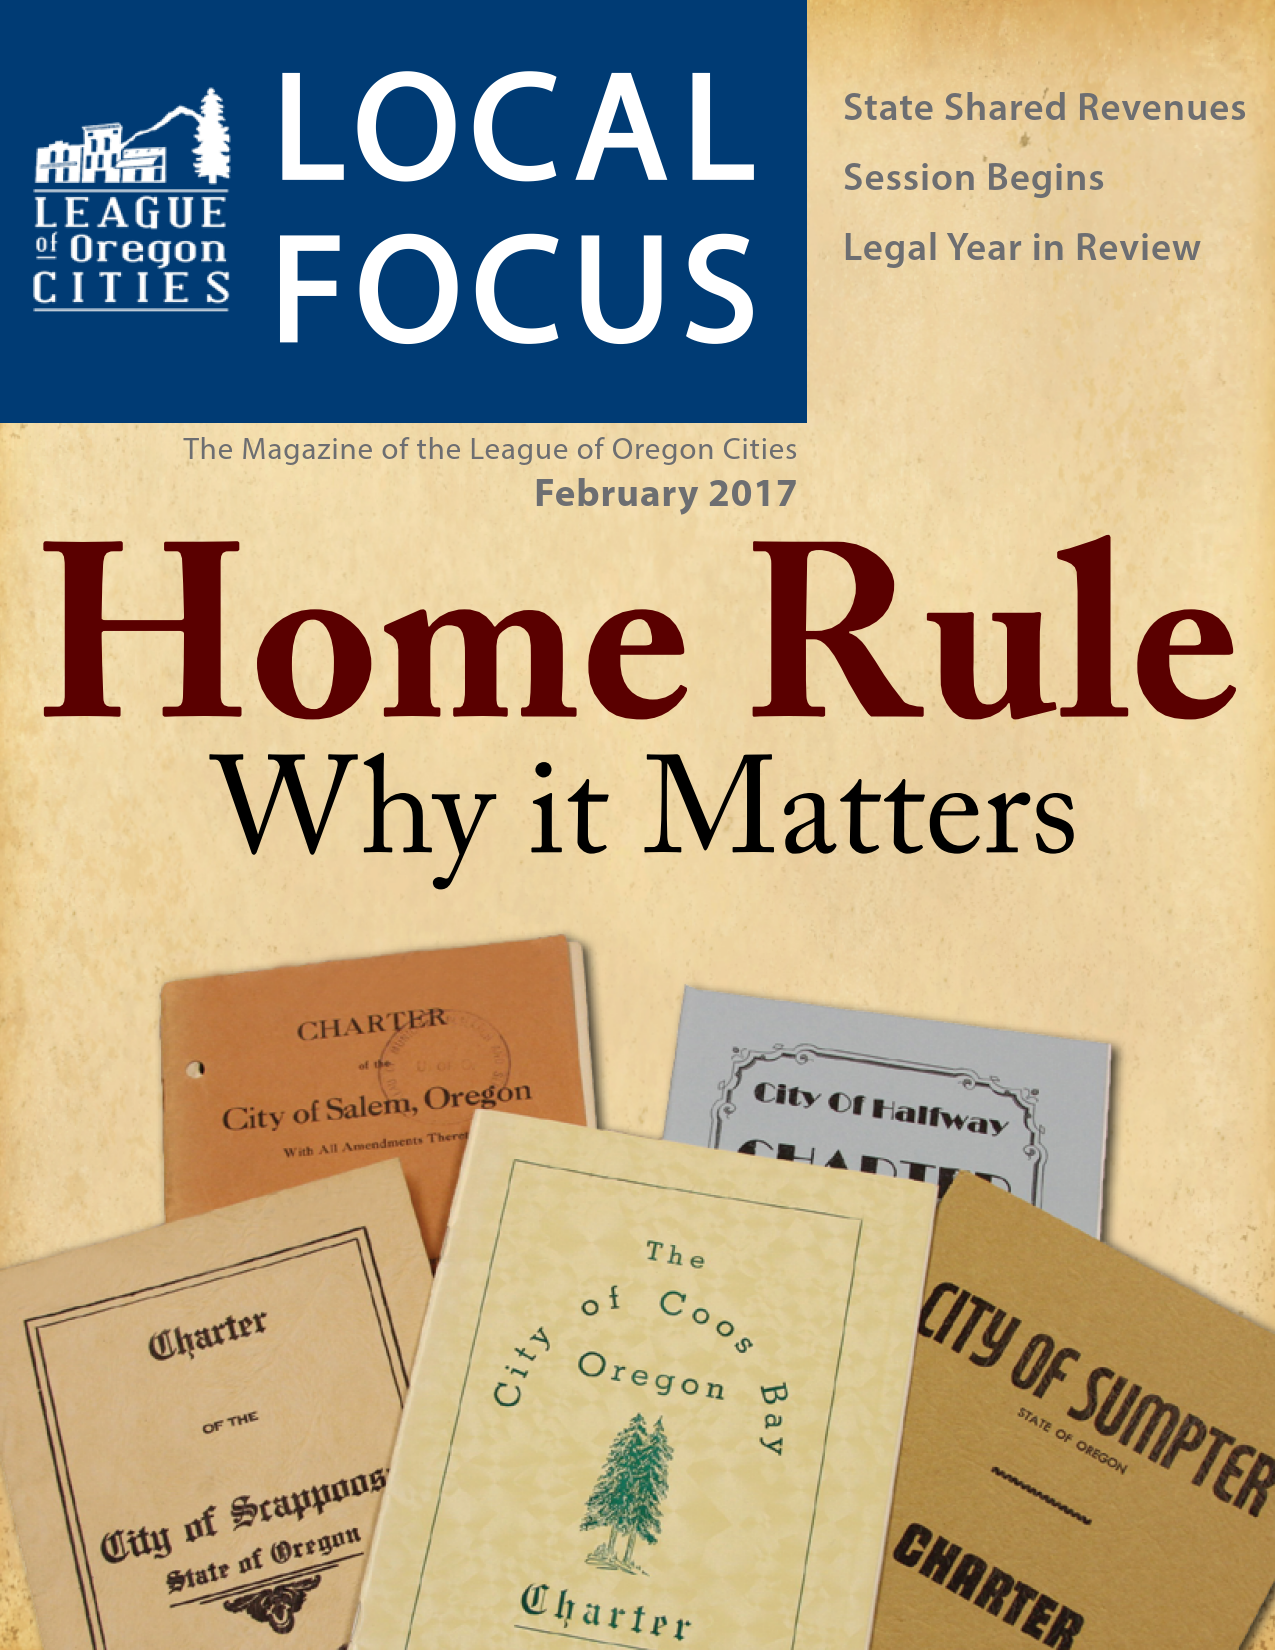 Home rule - Why it matters